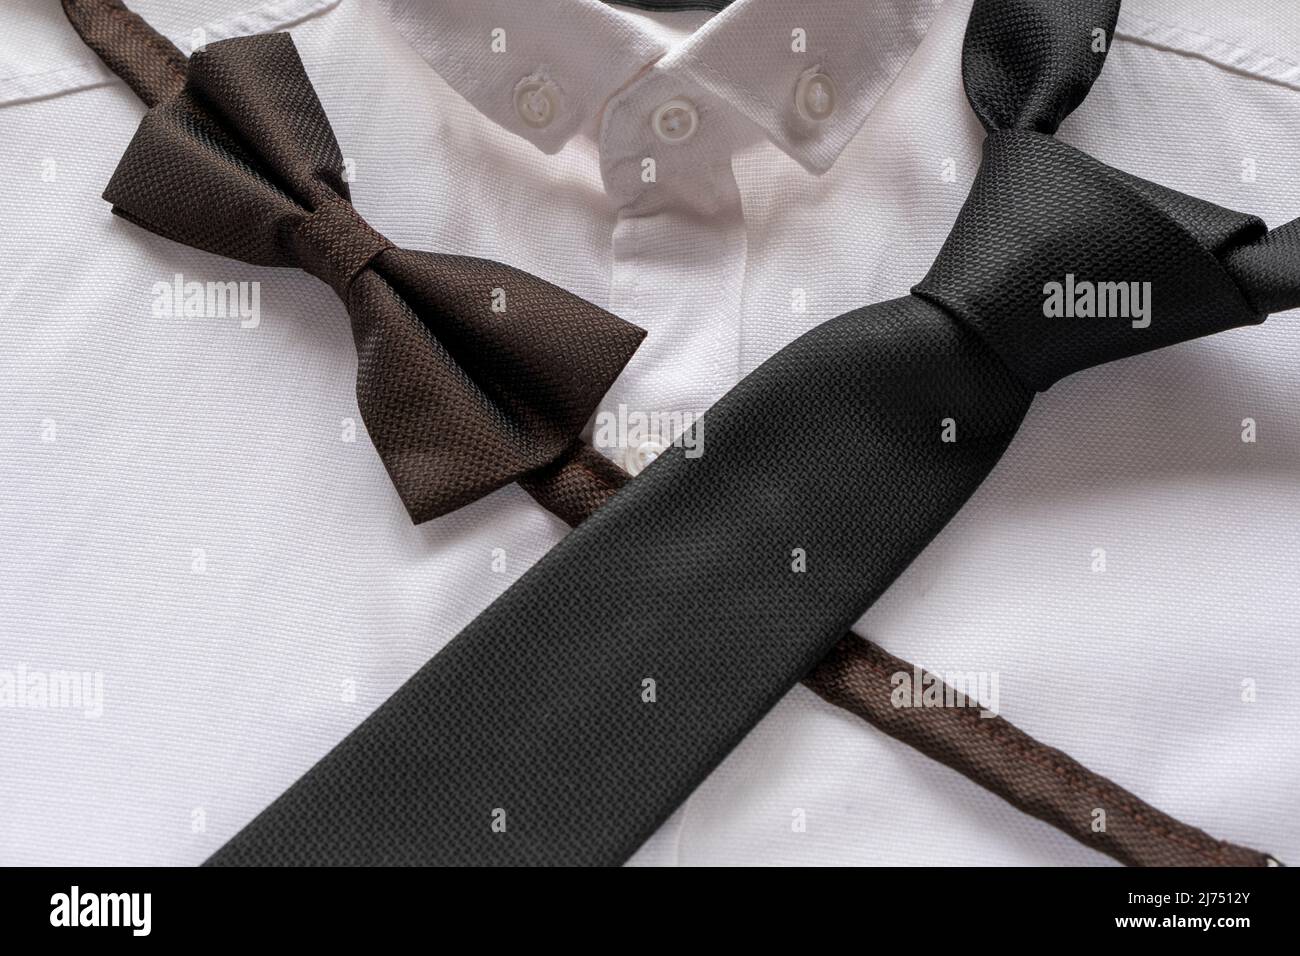 Black tie and bow tie on white shirt, men fashion concept, black color accessories,  men clothing idea, sitting view Stock Photo